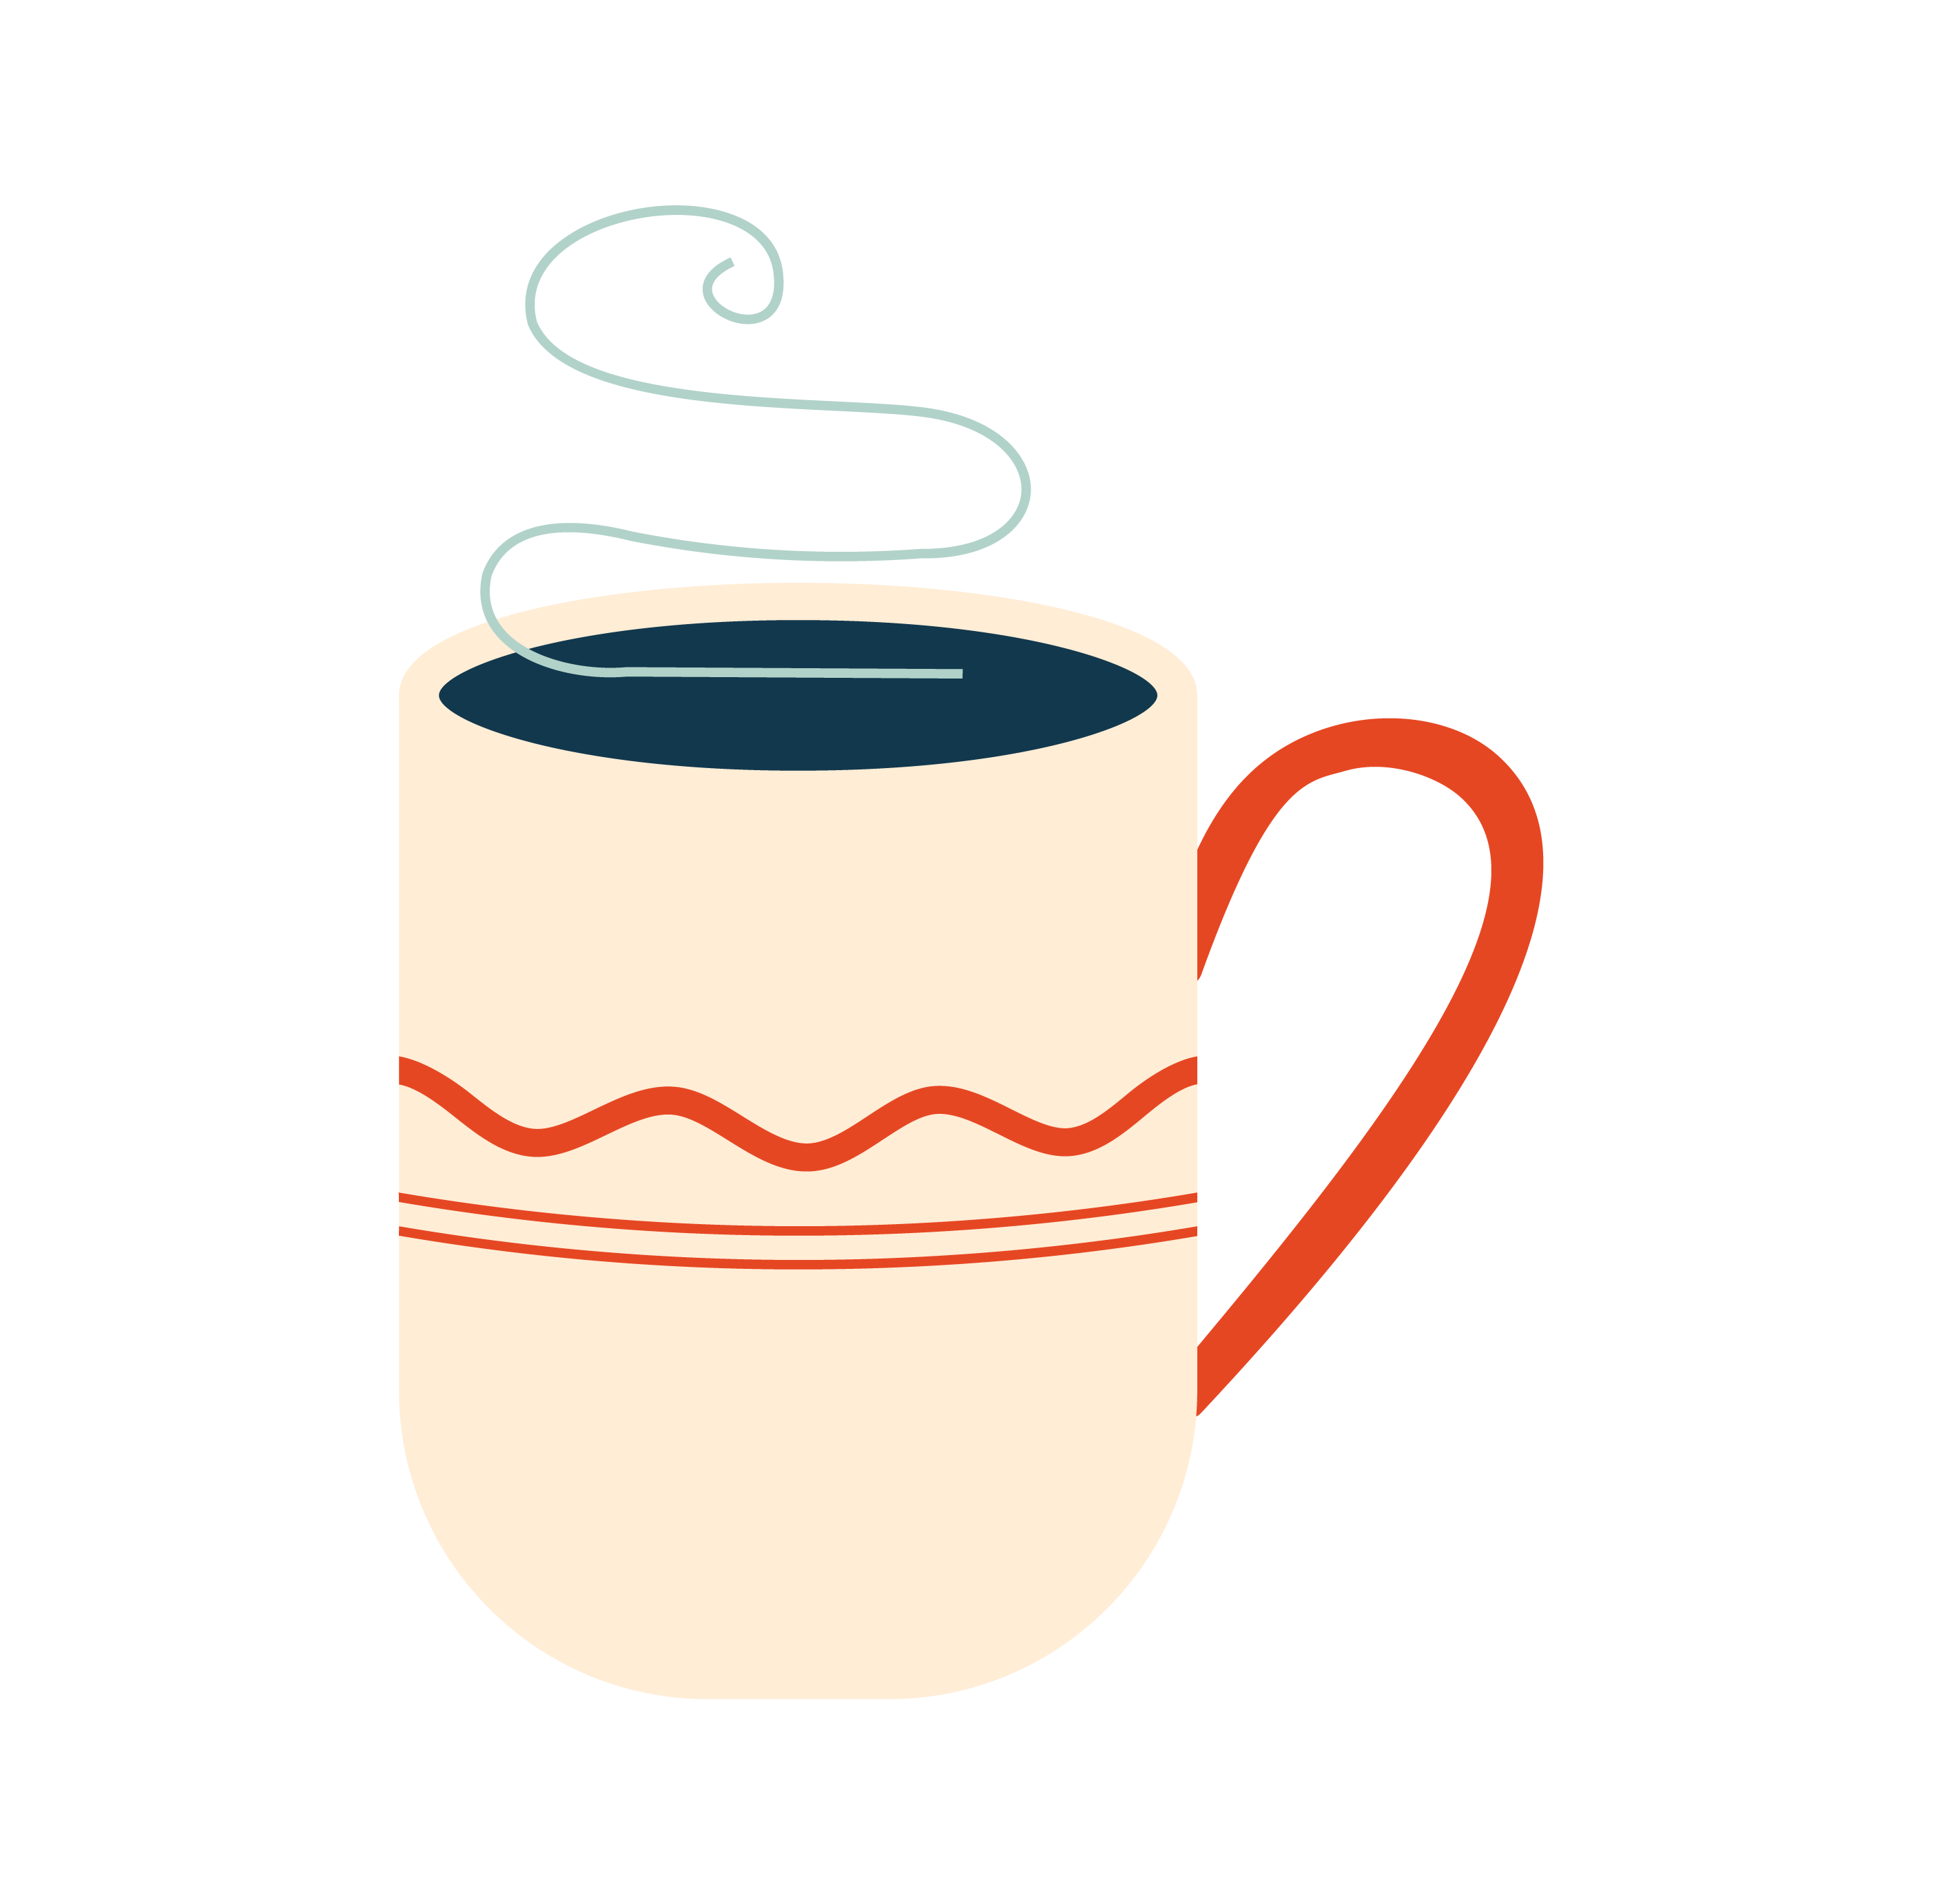 Off white illustration of a coffee mug with a red handle.